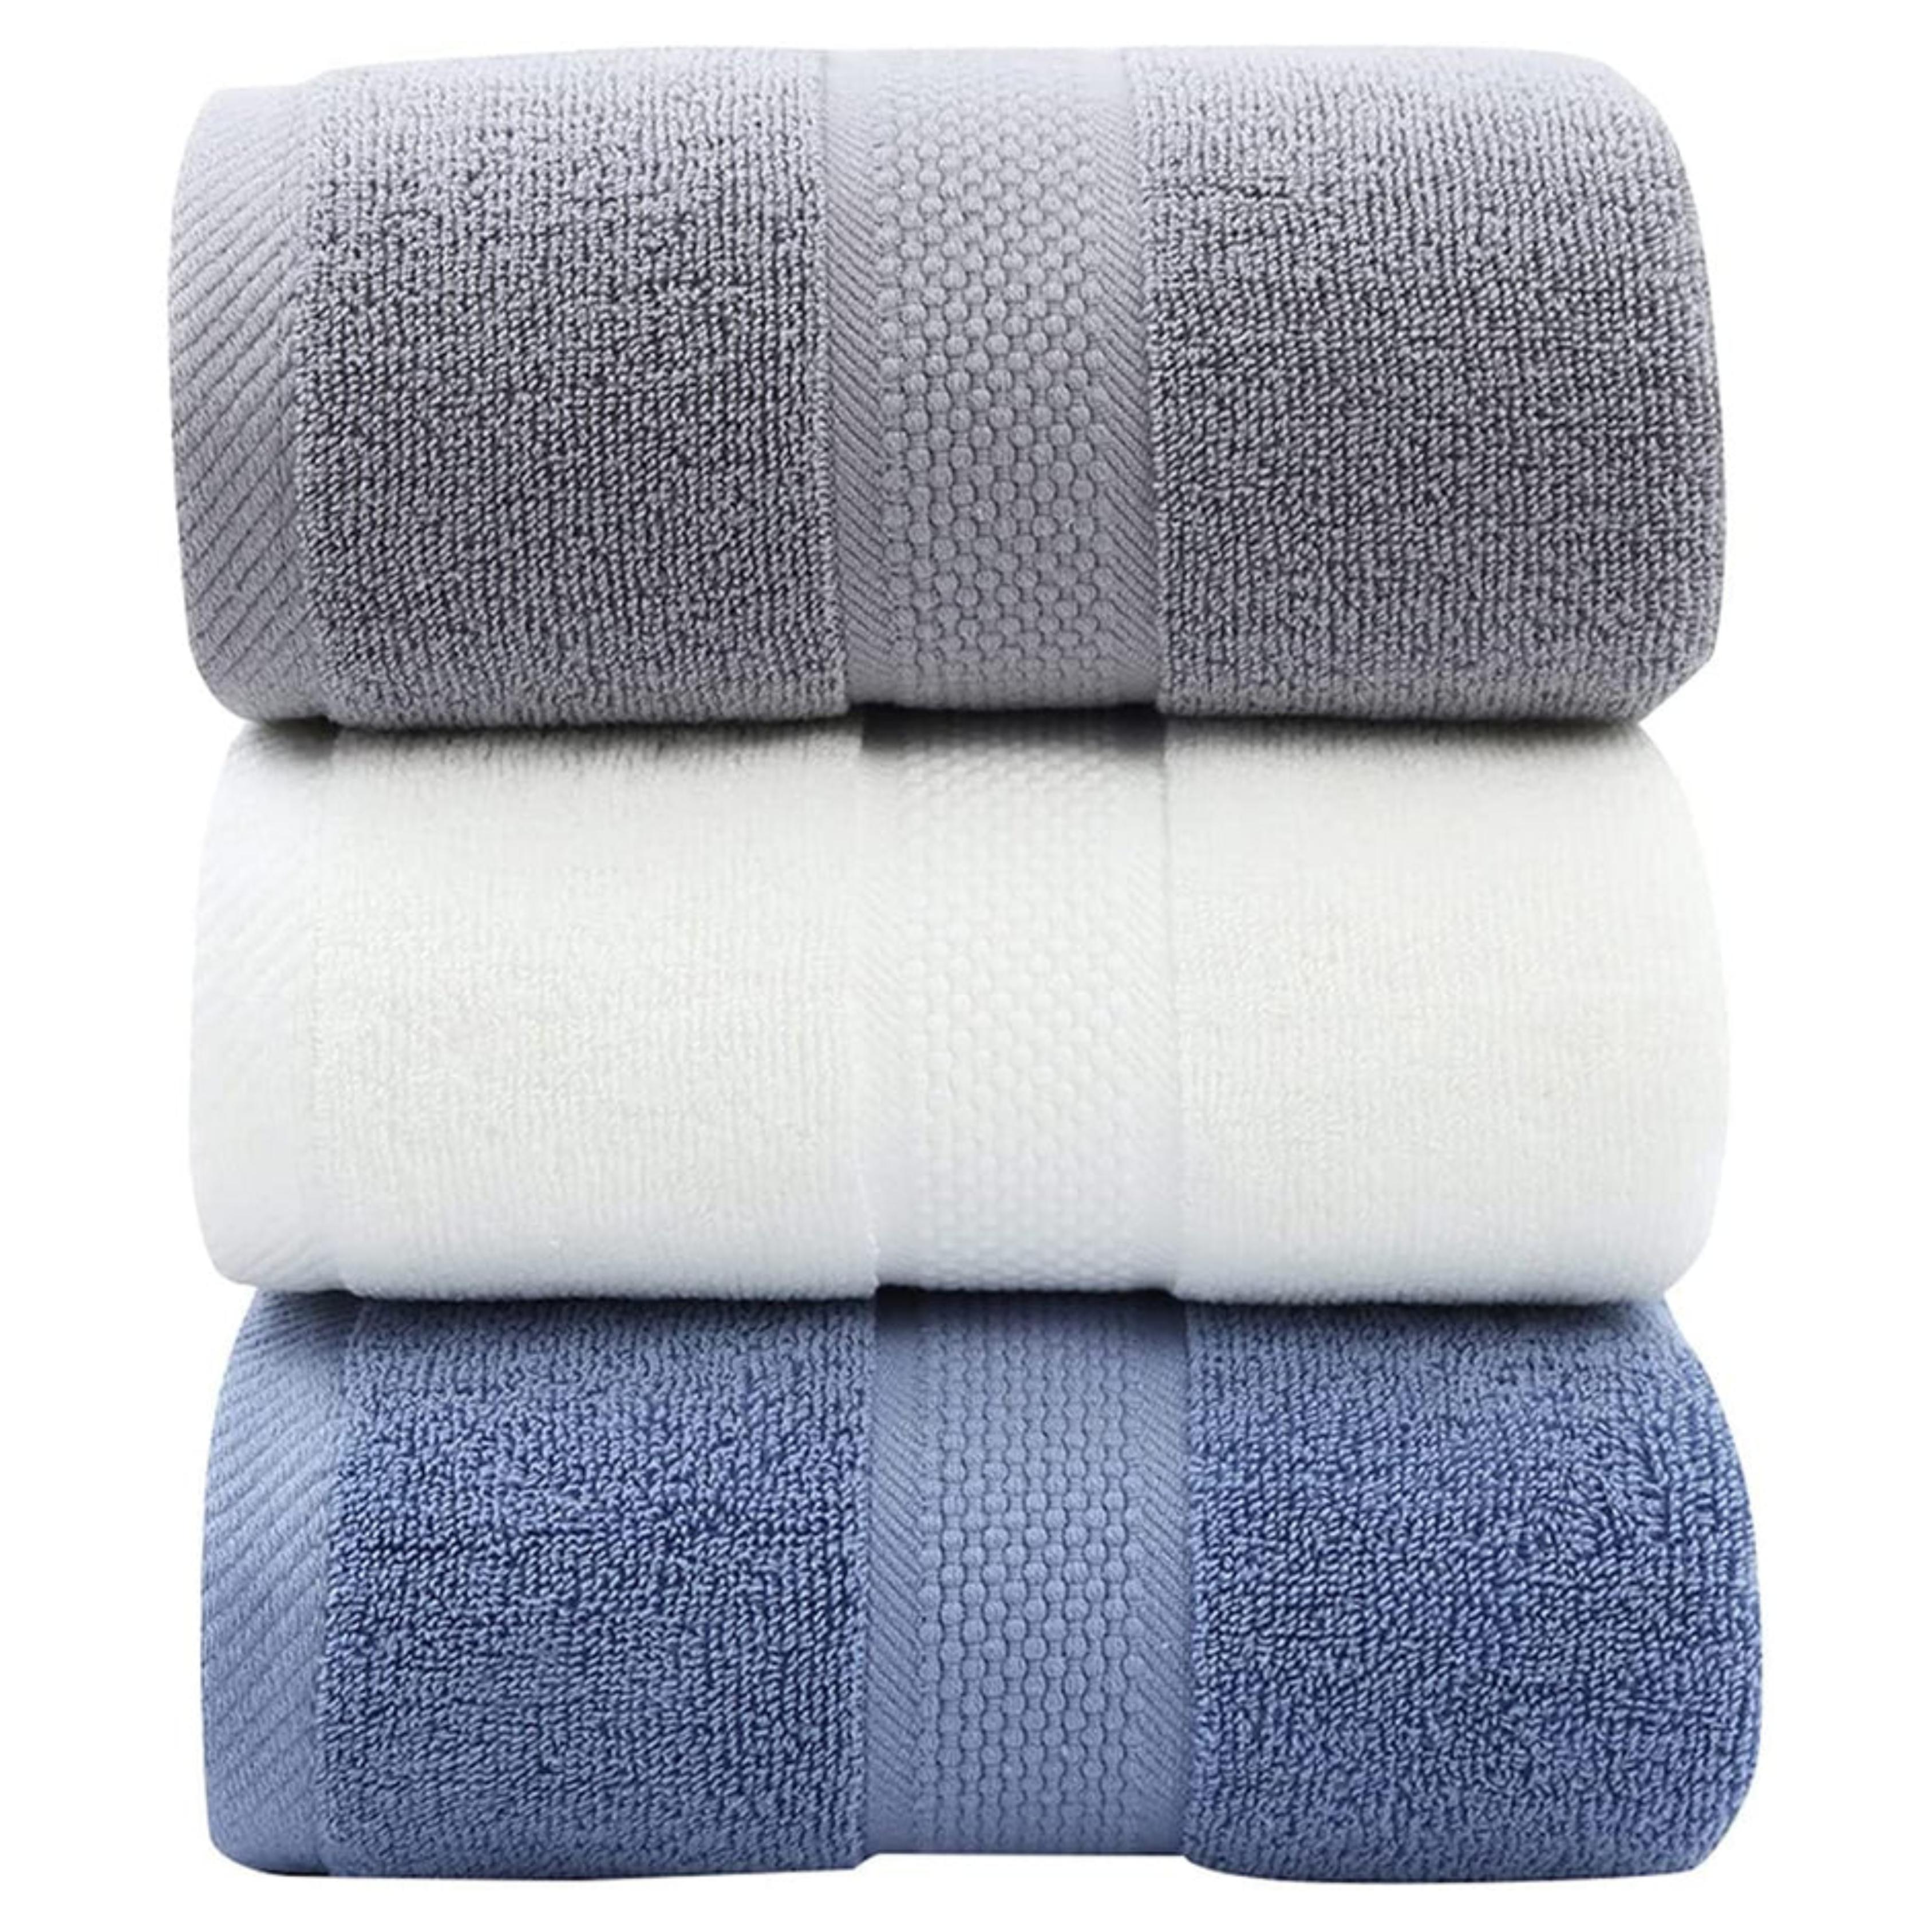 KASTWAVE Premium Cotton Bath Hand Towels for Bathroom Combed Cotton Hand Towels Absorbent Soft Cotton Hand Towels for Bathroom, Hand & Face Washcloths Set, Soft Absorbency and Fade Resistant Quick Dry